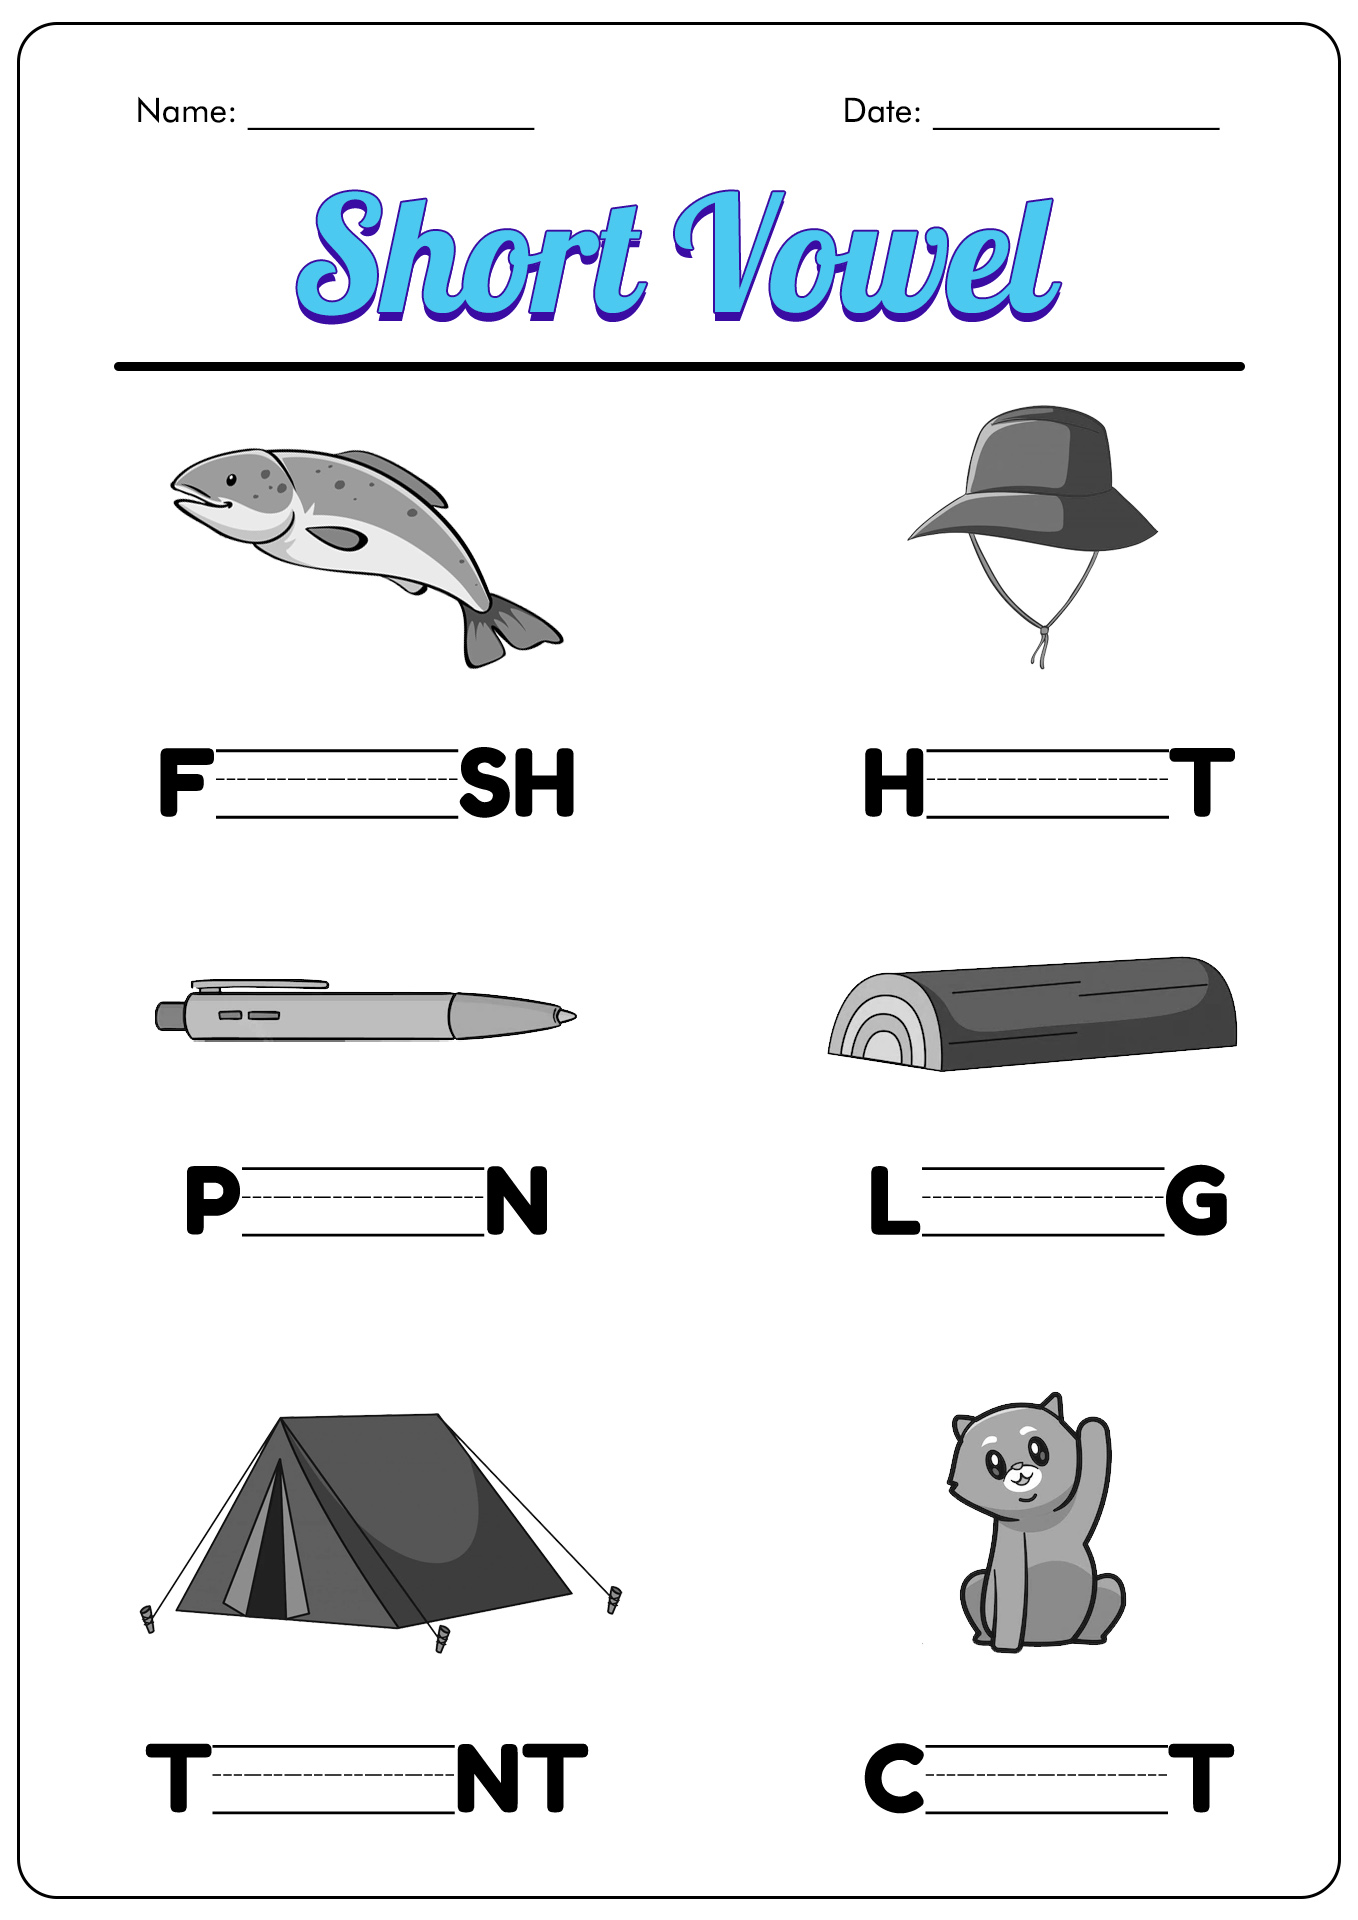 Long and Short Vowel Review Worksheets Image